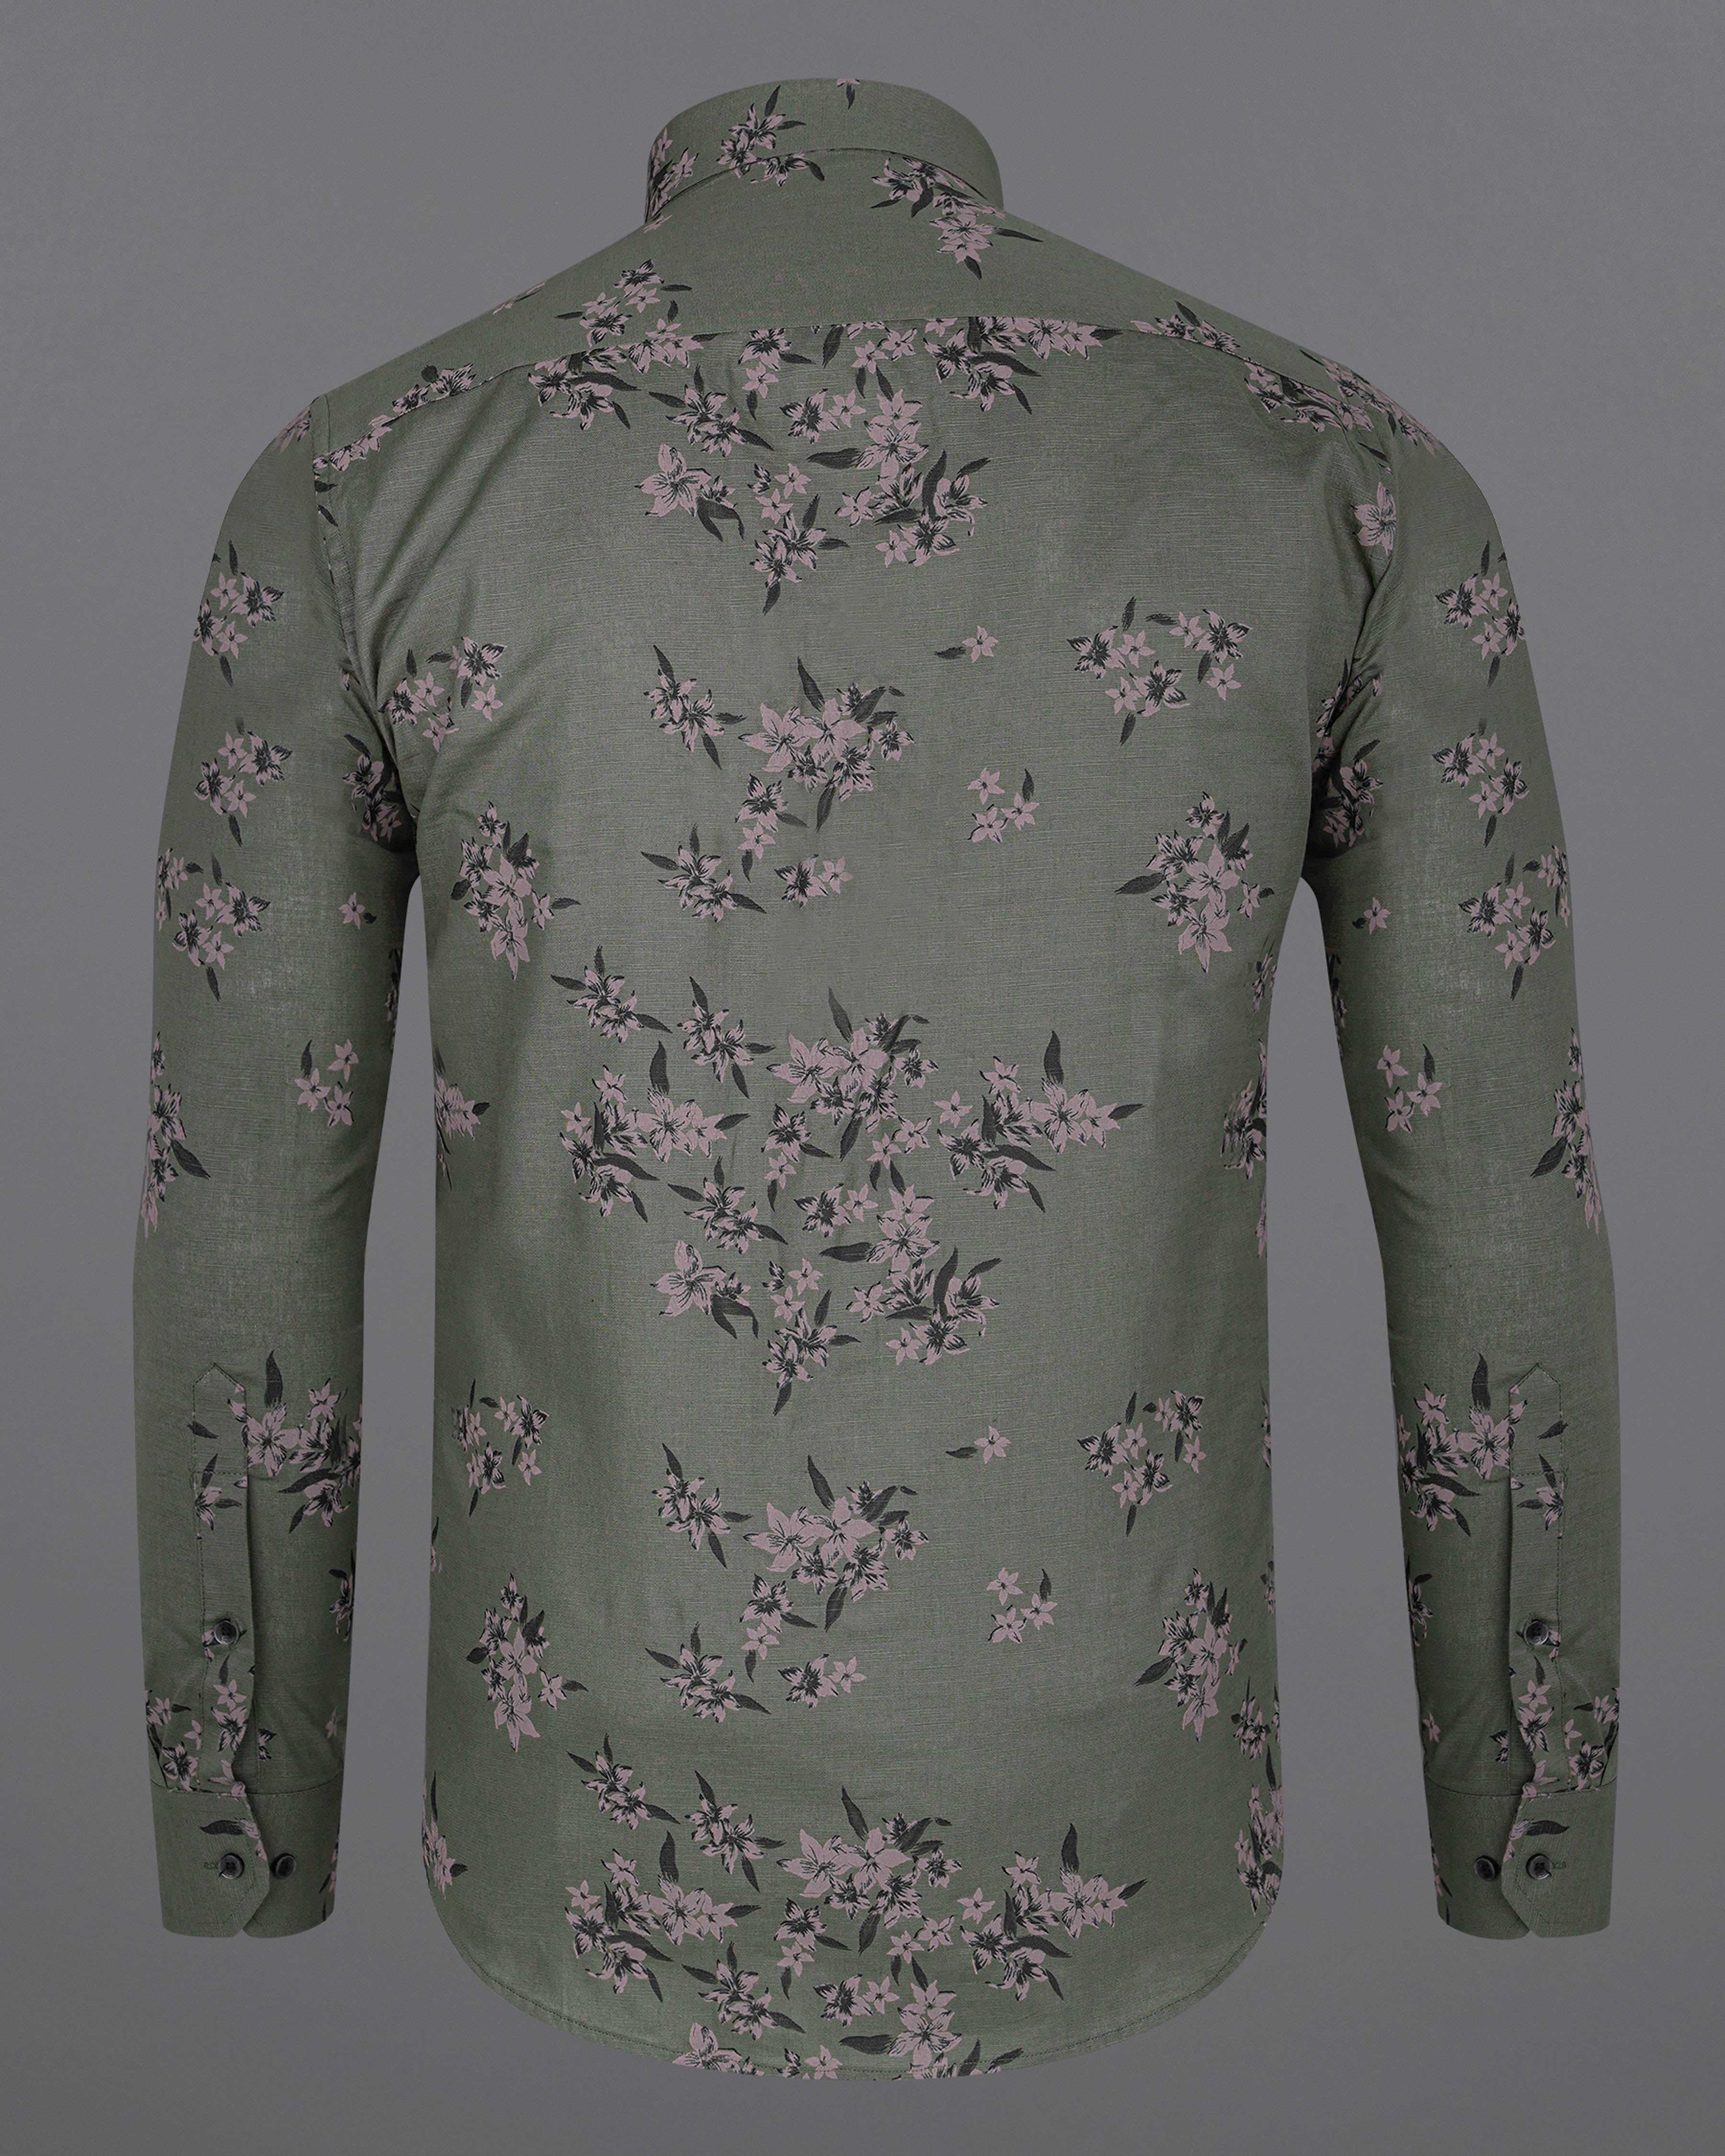 Fuscous Green With Floral Printed Luxurious Linen Shirt 8074-BLK-38,8074-BLK-38,8074-BLK-39,8074-BLK-39,8074-BLK-40,8074-BLK-40,8074-BLK-42,8074-BLK-42,8074-BLK-44,8074-BLK-44,8074-BLK-46,8074-BLK-46,8074-BLK-48,8074-BLK-48,8074-BLK-50,8074-BLK-50,8074-BLK-52,8074-BLK-52